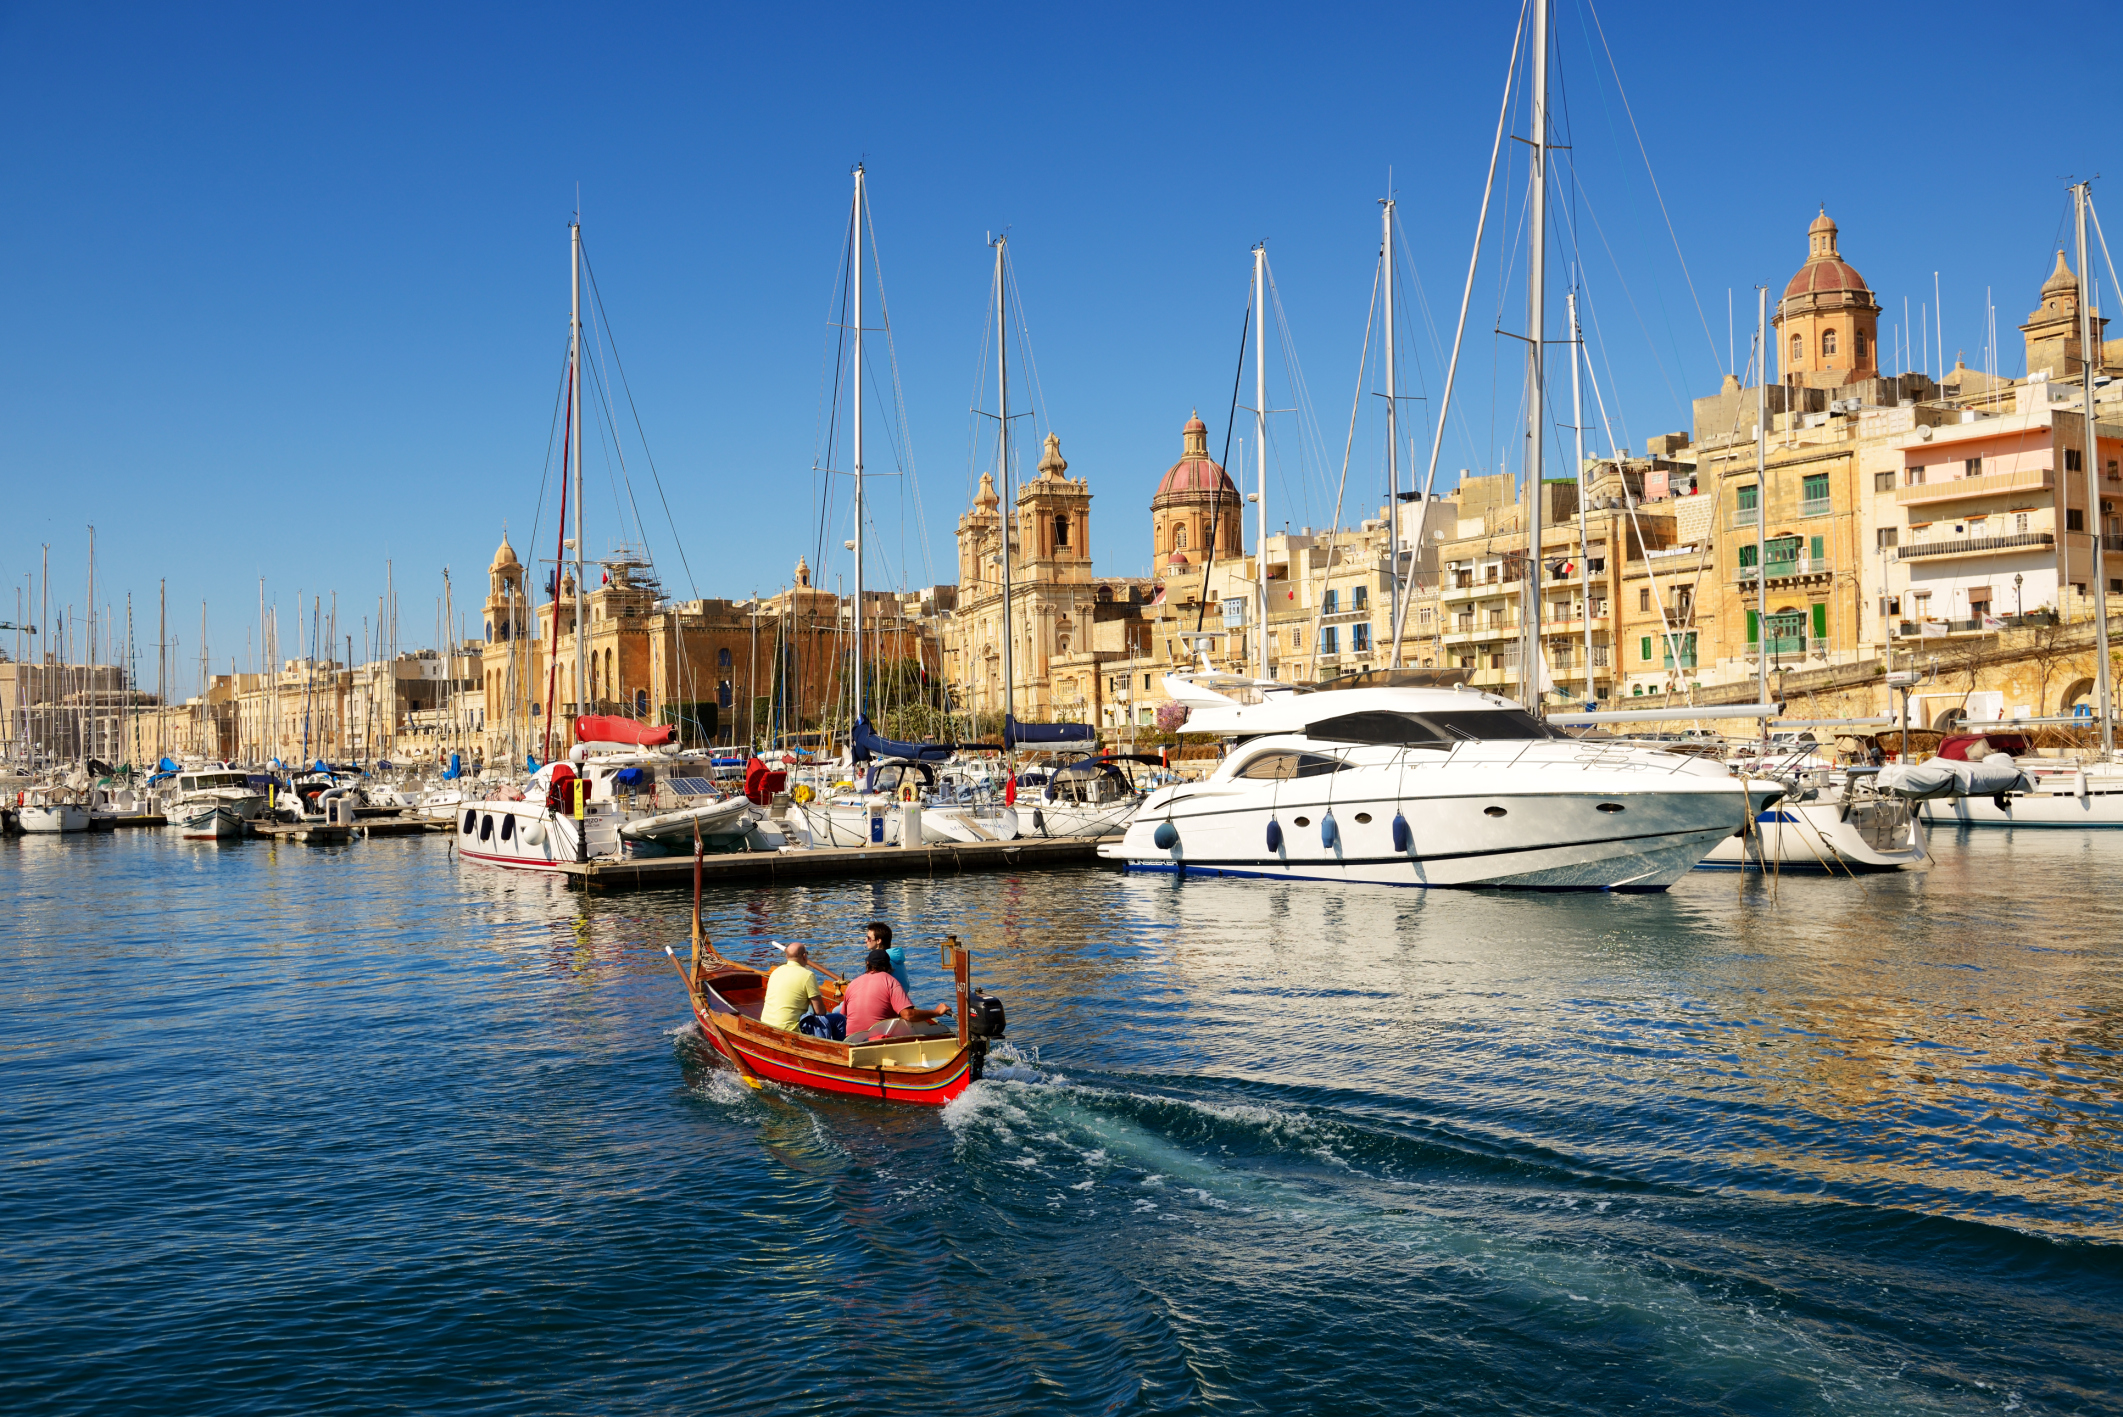 Where is Malta and Why is it a Must-Visit in 2019? 🇲🇹 | Skyscanner